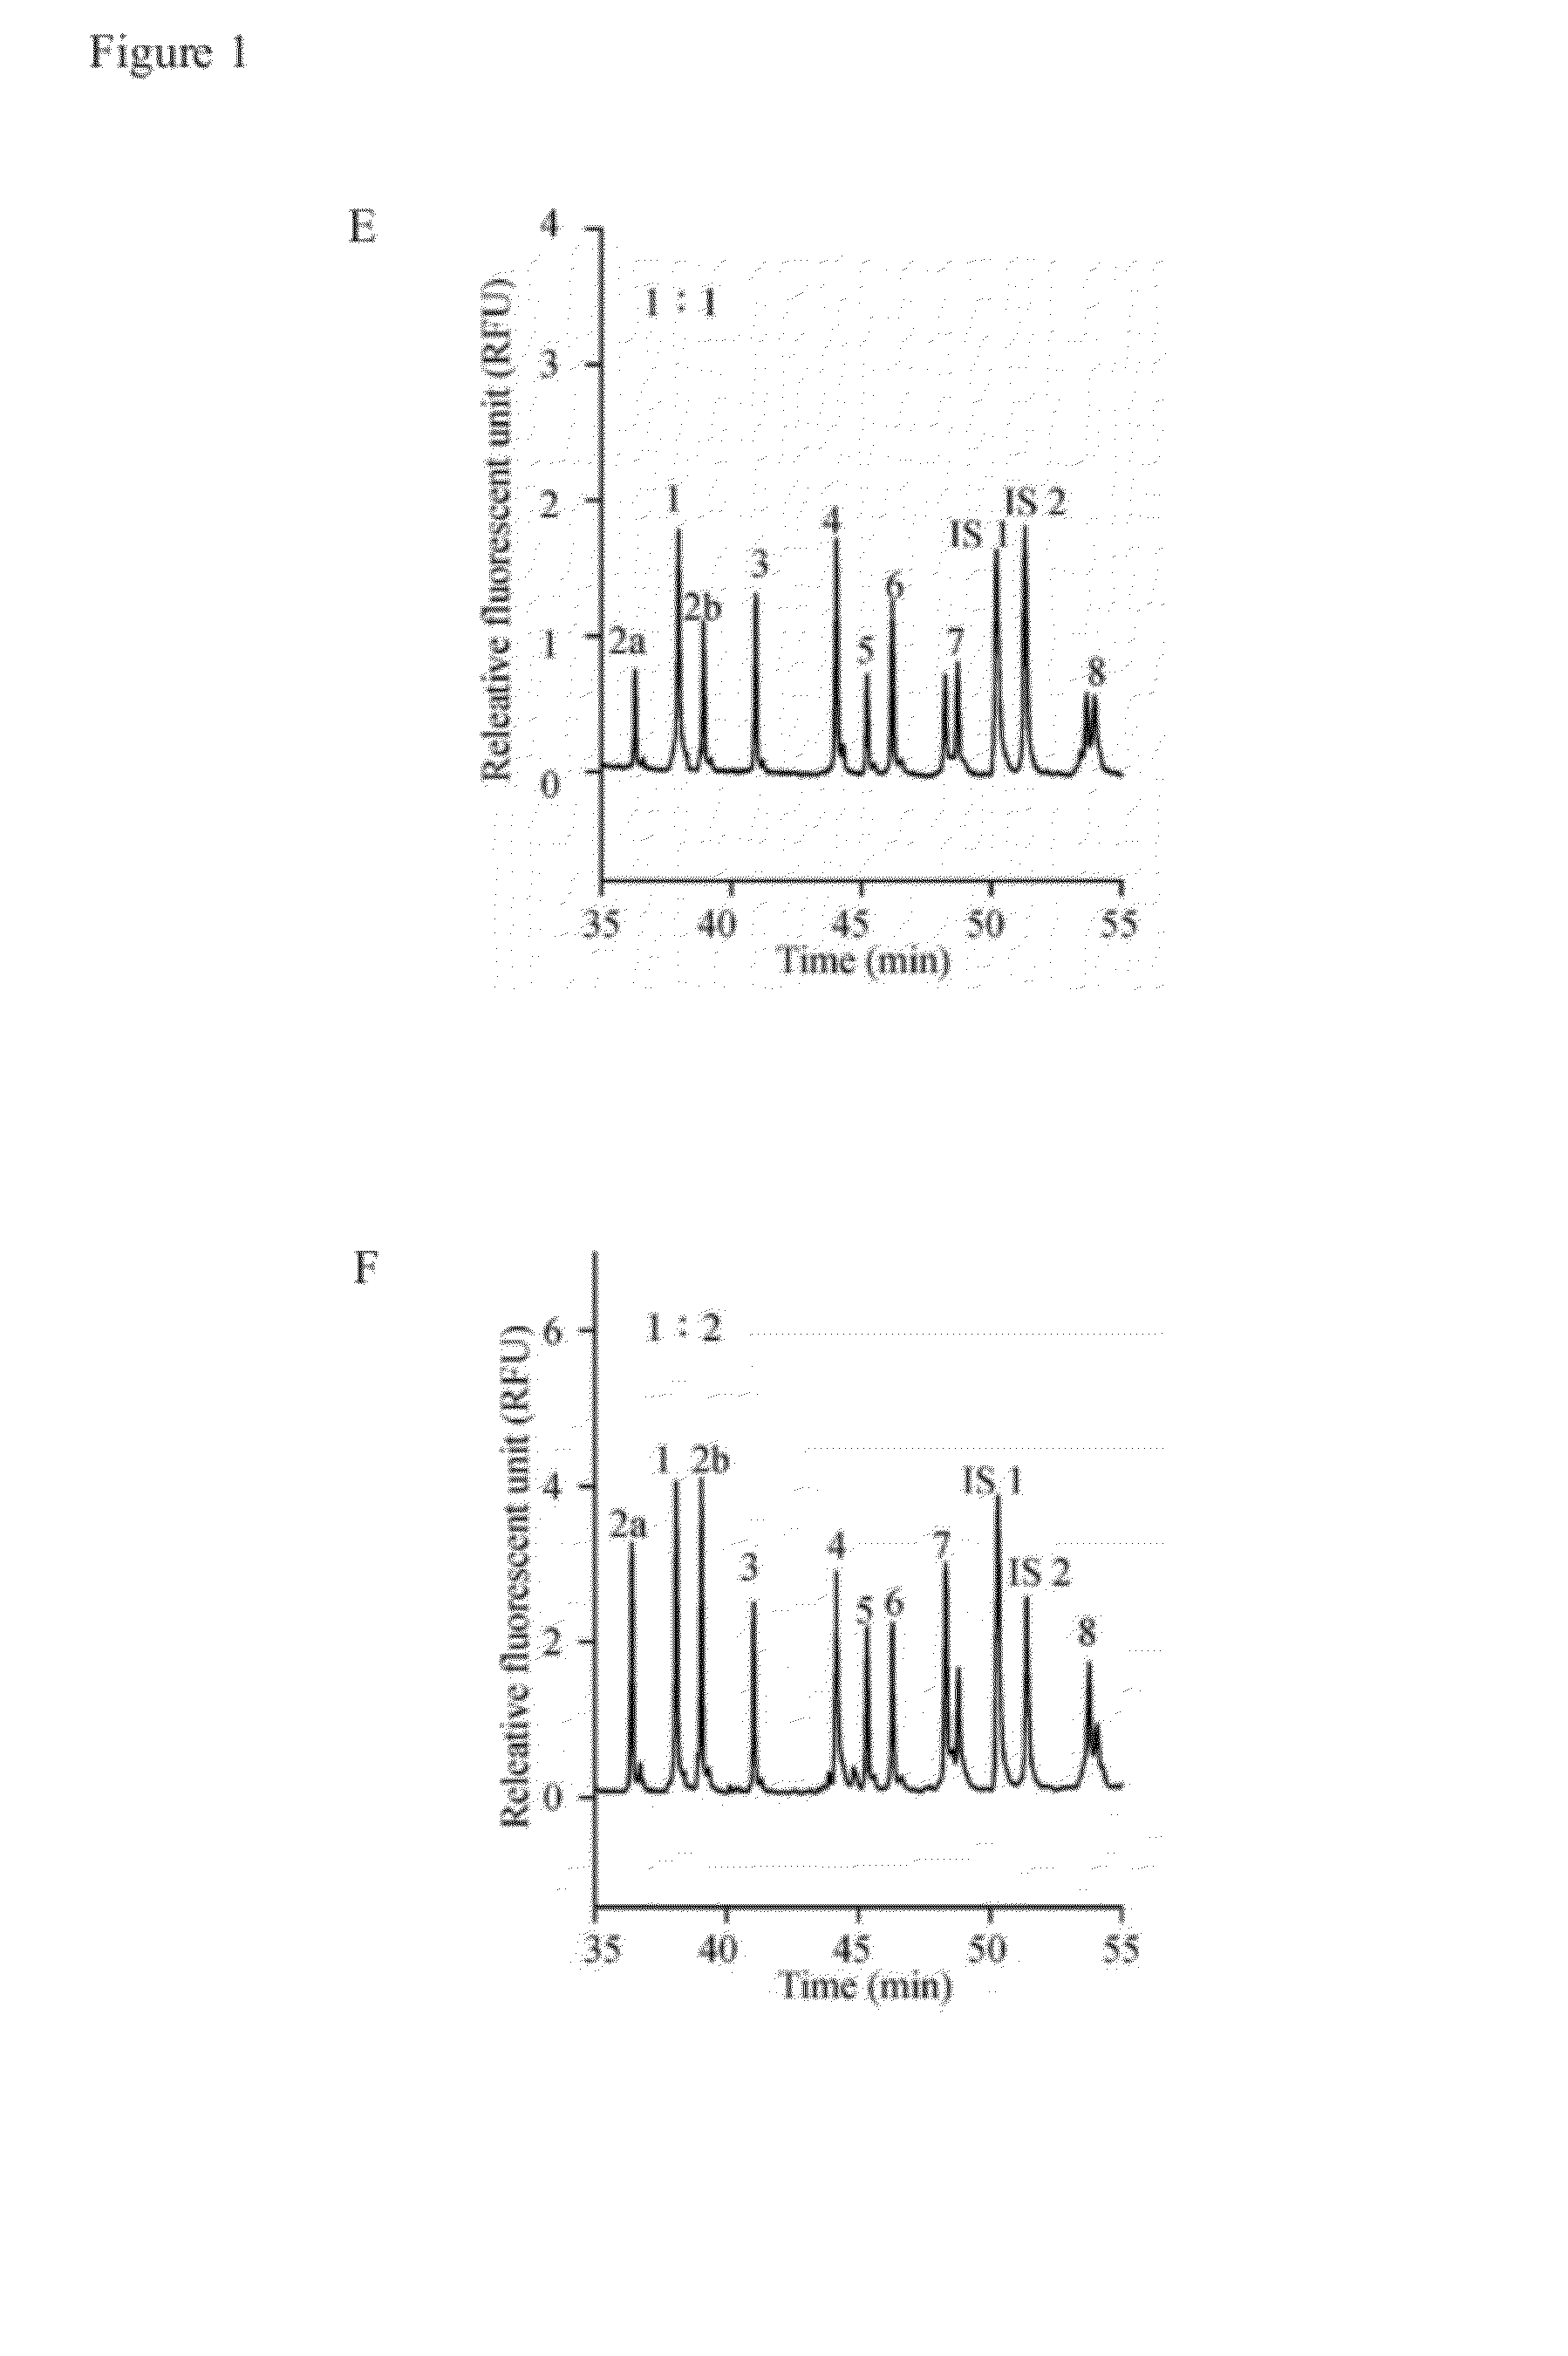 Method for diagnosing spinal muscular atrophy